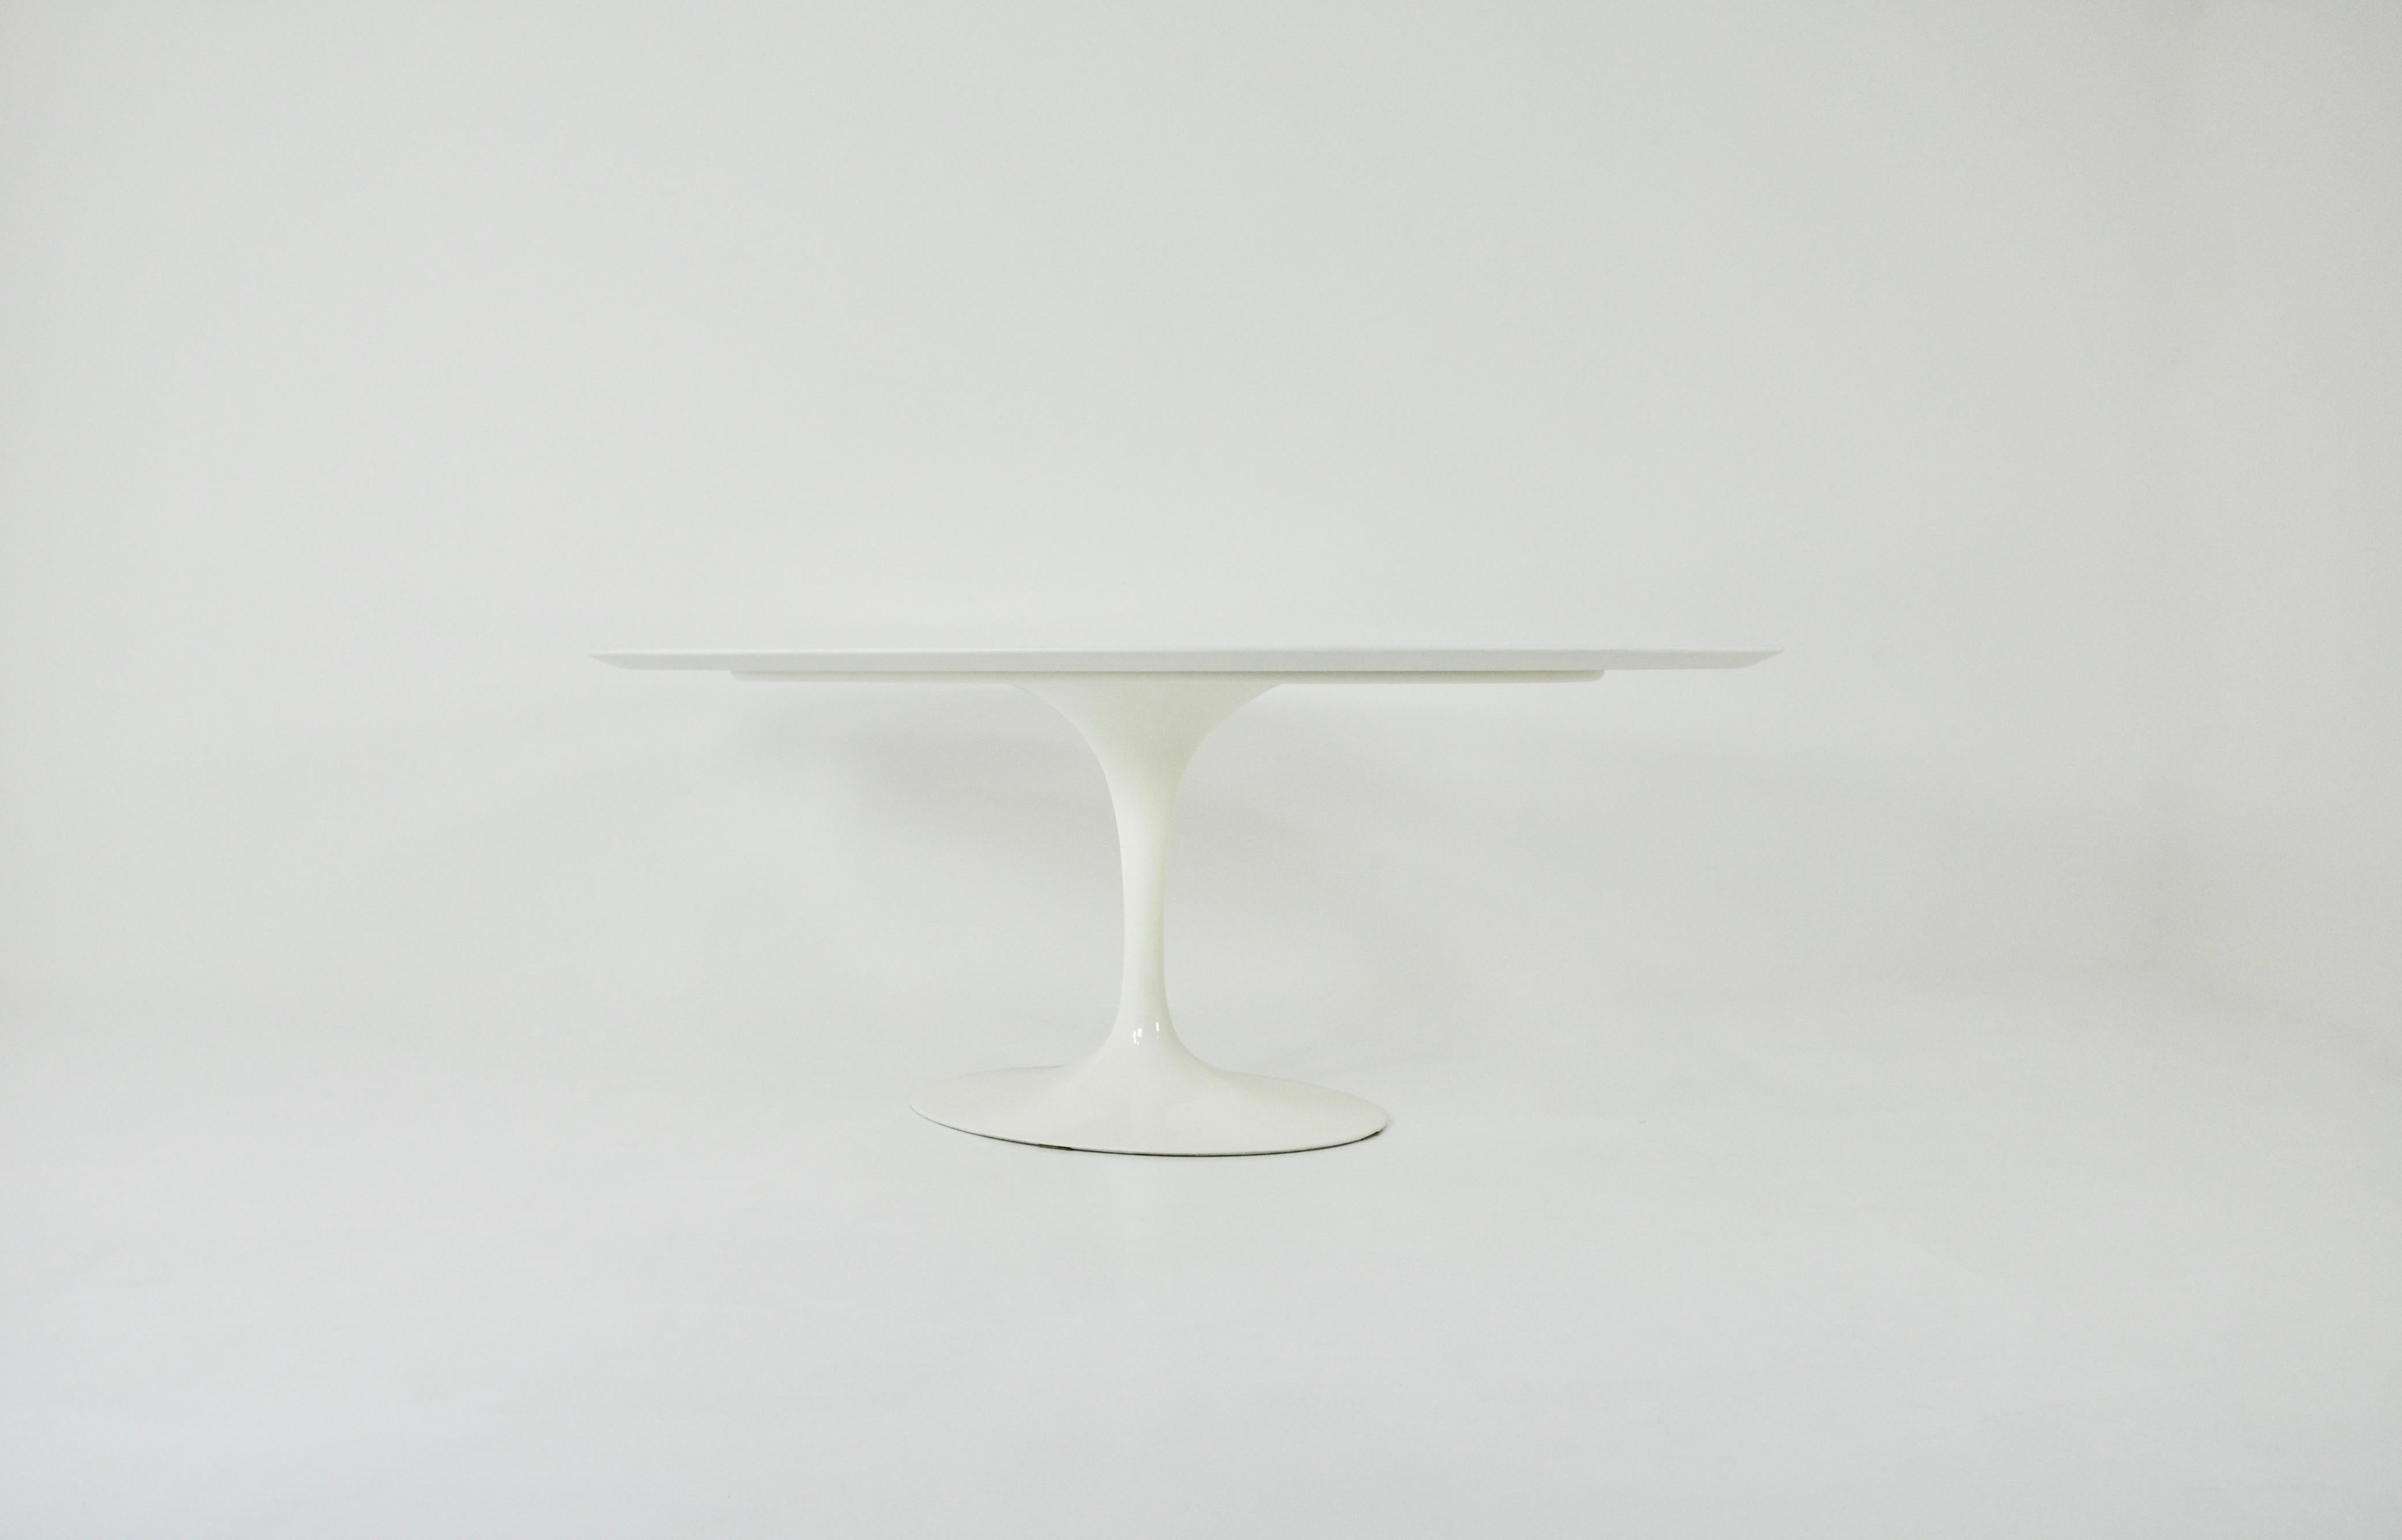 Oval table in white laminated wood with Aluminium leg designed by Eero Saarinen and produced by knoll international. Wear due to time and age of the table.